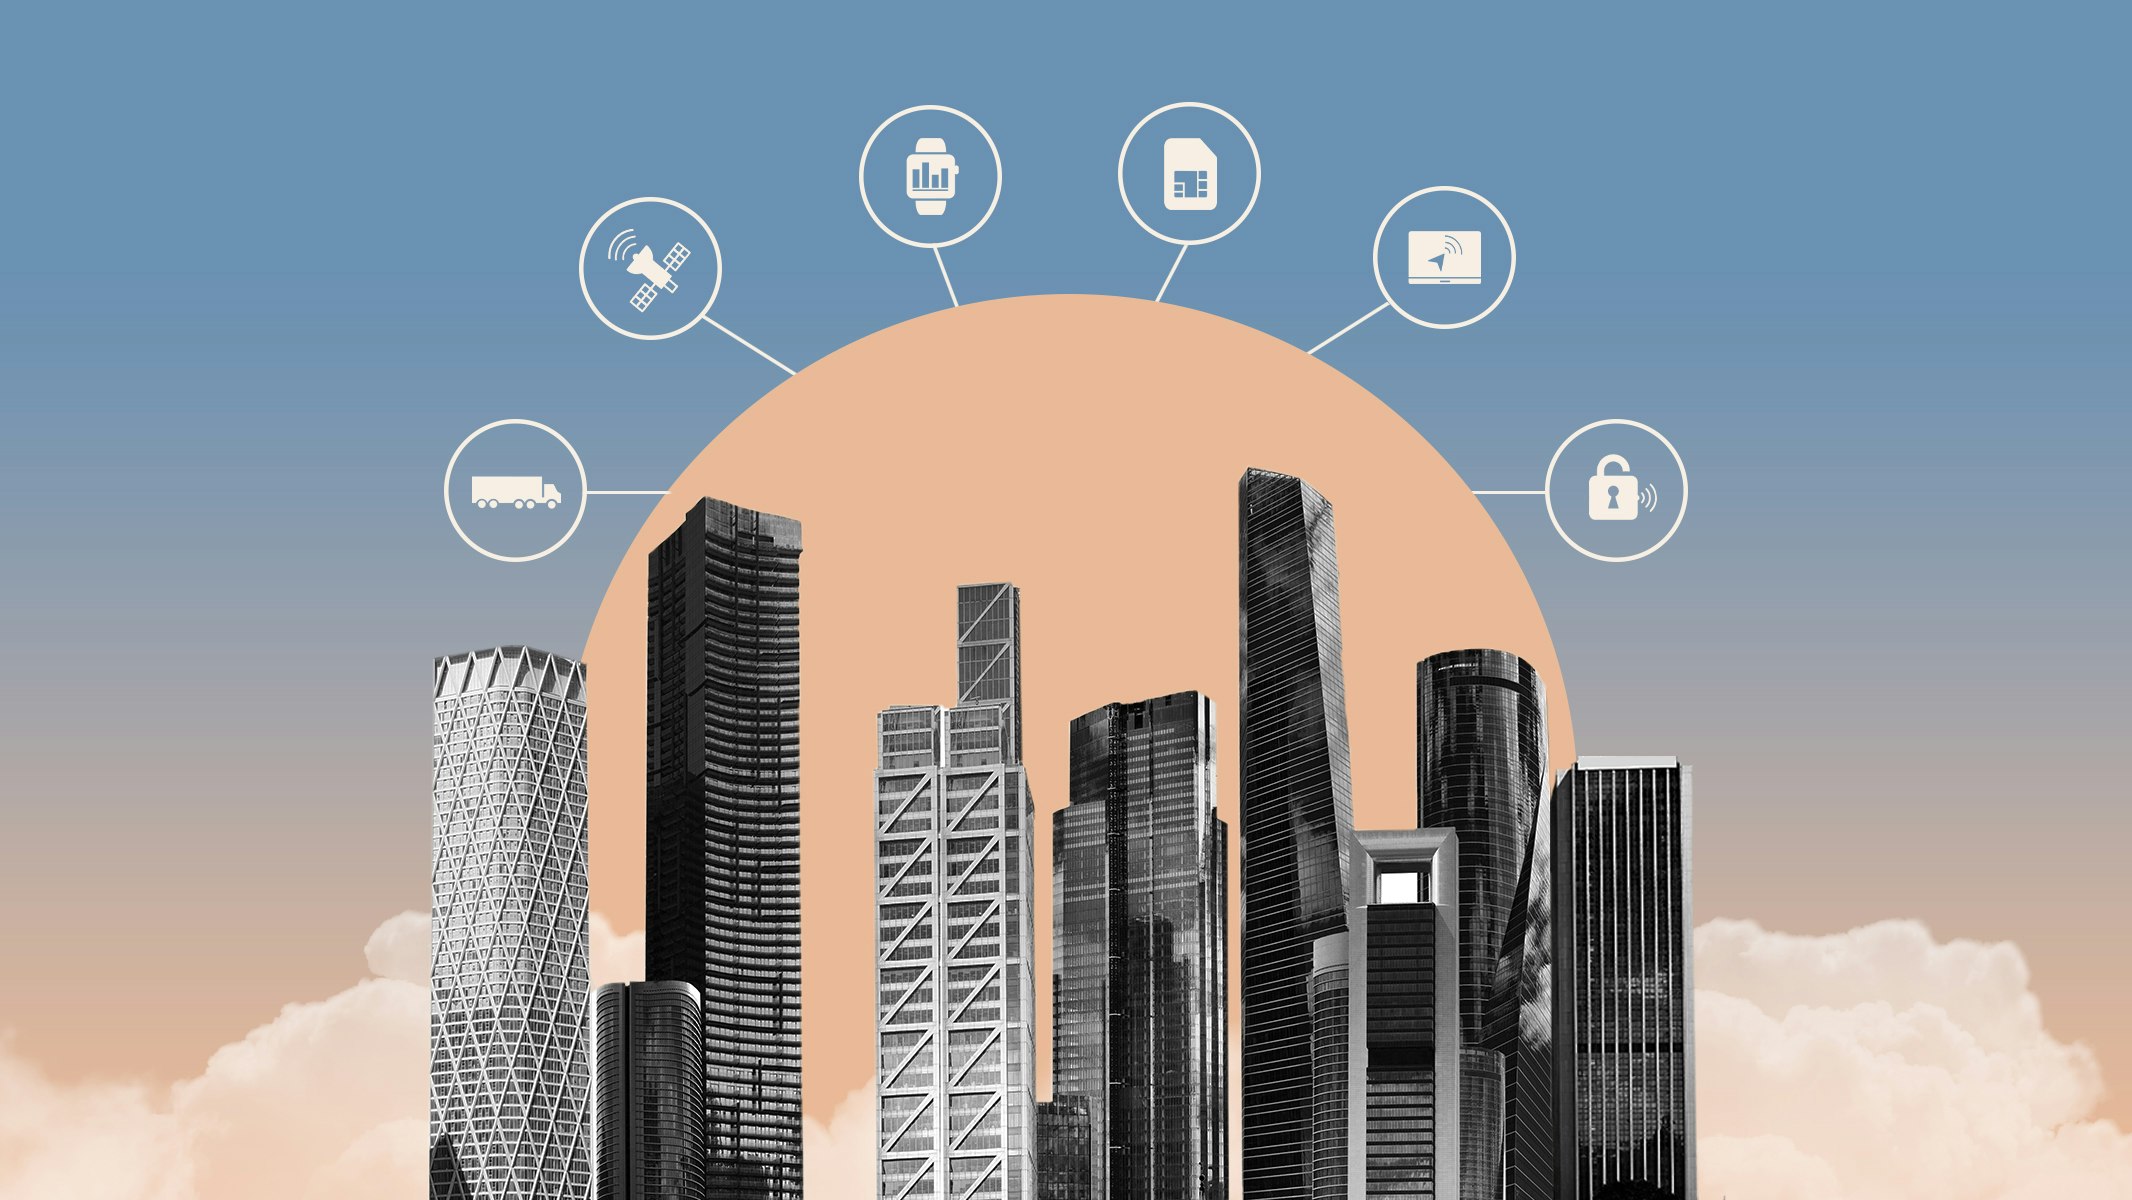 Illustration of a city skyline being connected to the Internet of Things, IoT, including delivery, satellite, smartwatch, memory card, web browser, and security